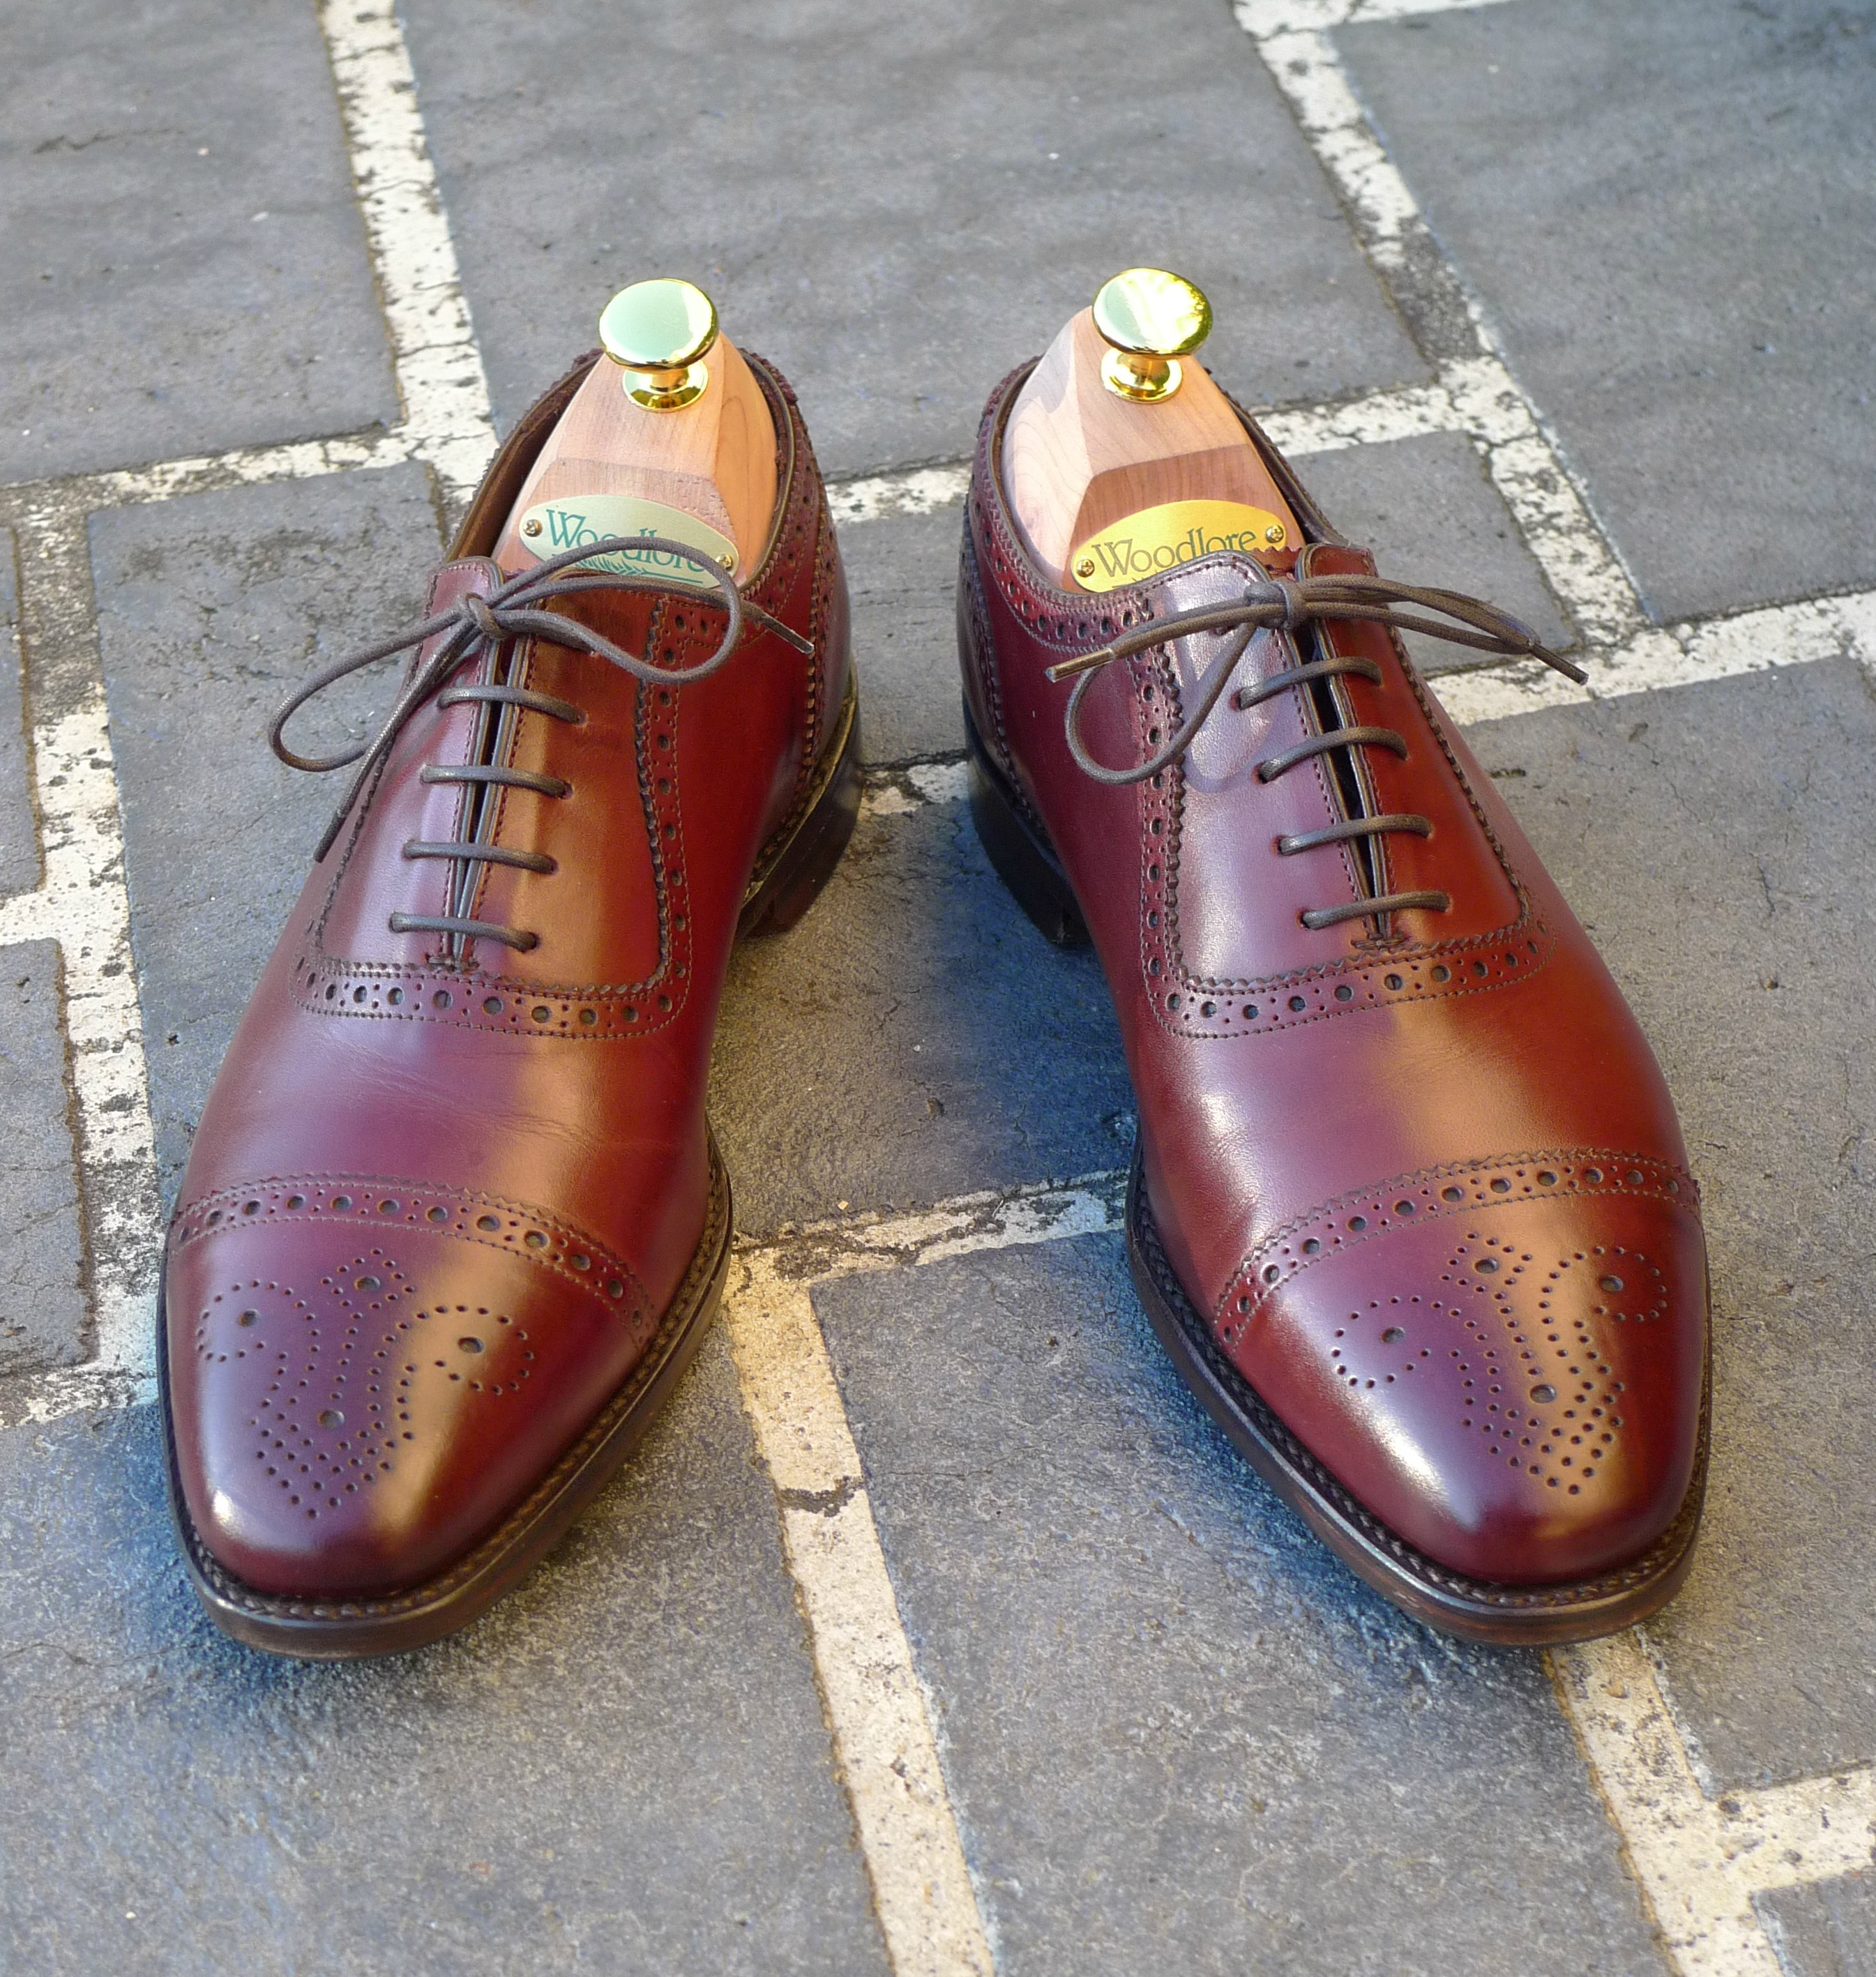 “LOAKE 1880 STRAND BURGUNDY REVIEW” - wurger’s Review of Loake Strand